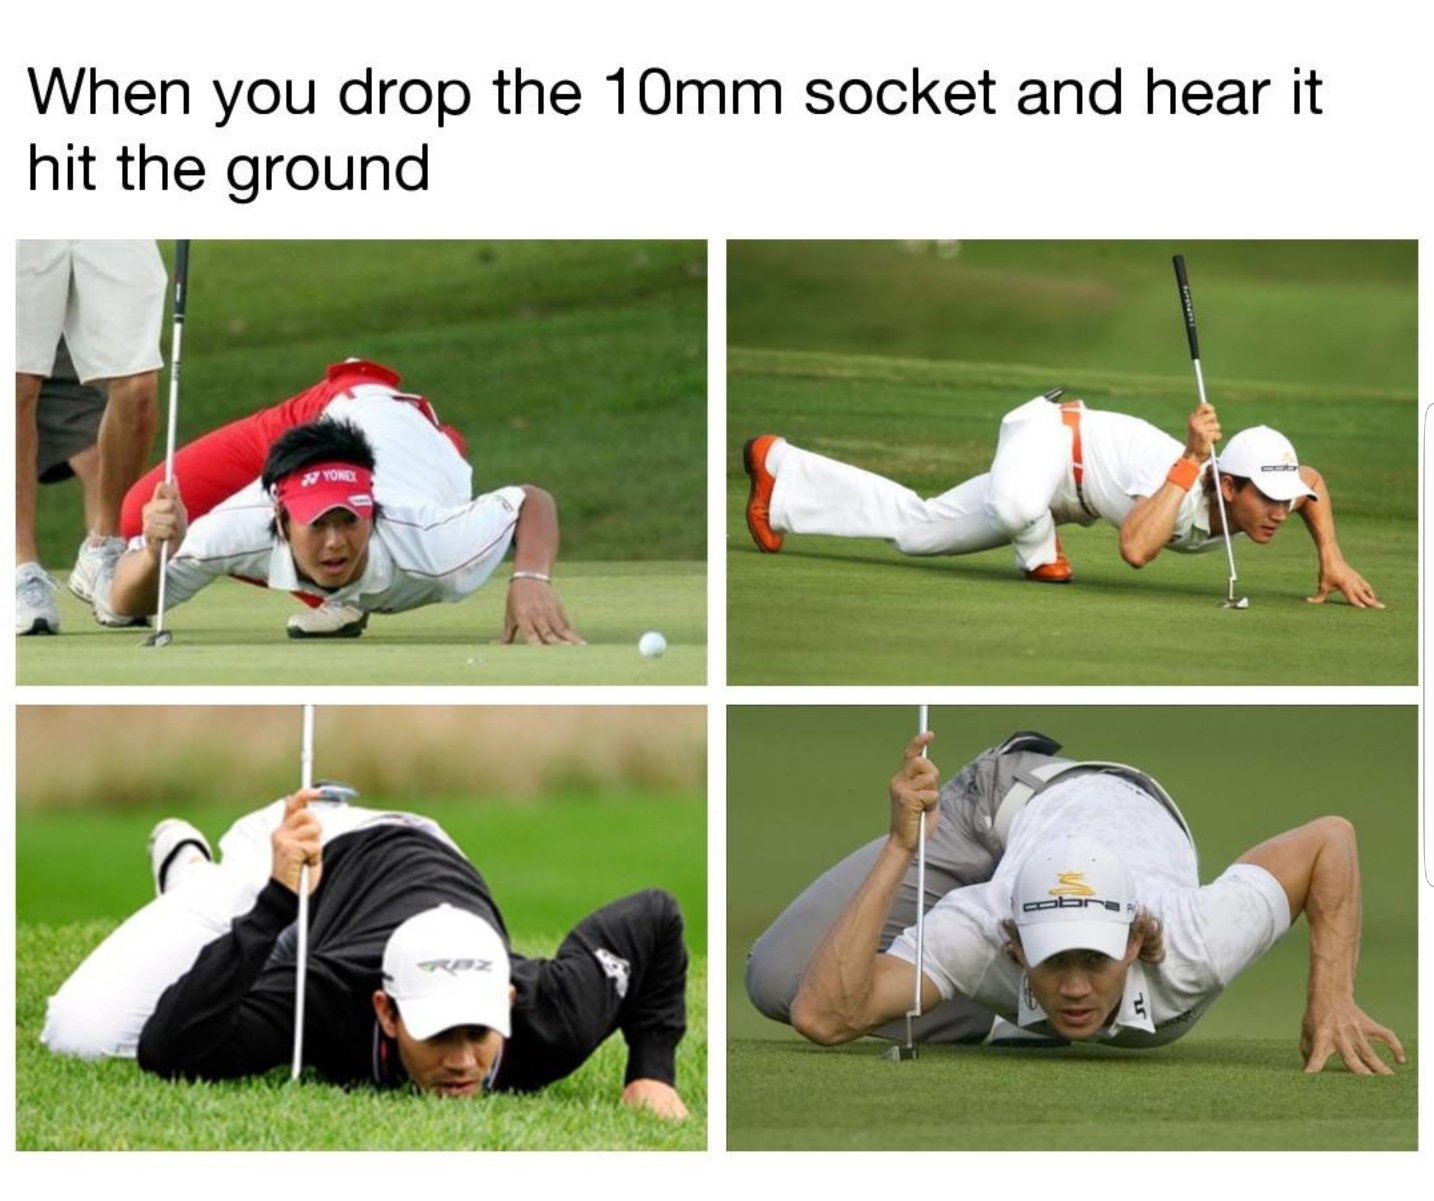 crack memes - When you drop the 10mm socket and hear it hit the ground